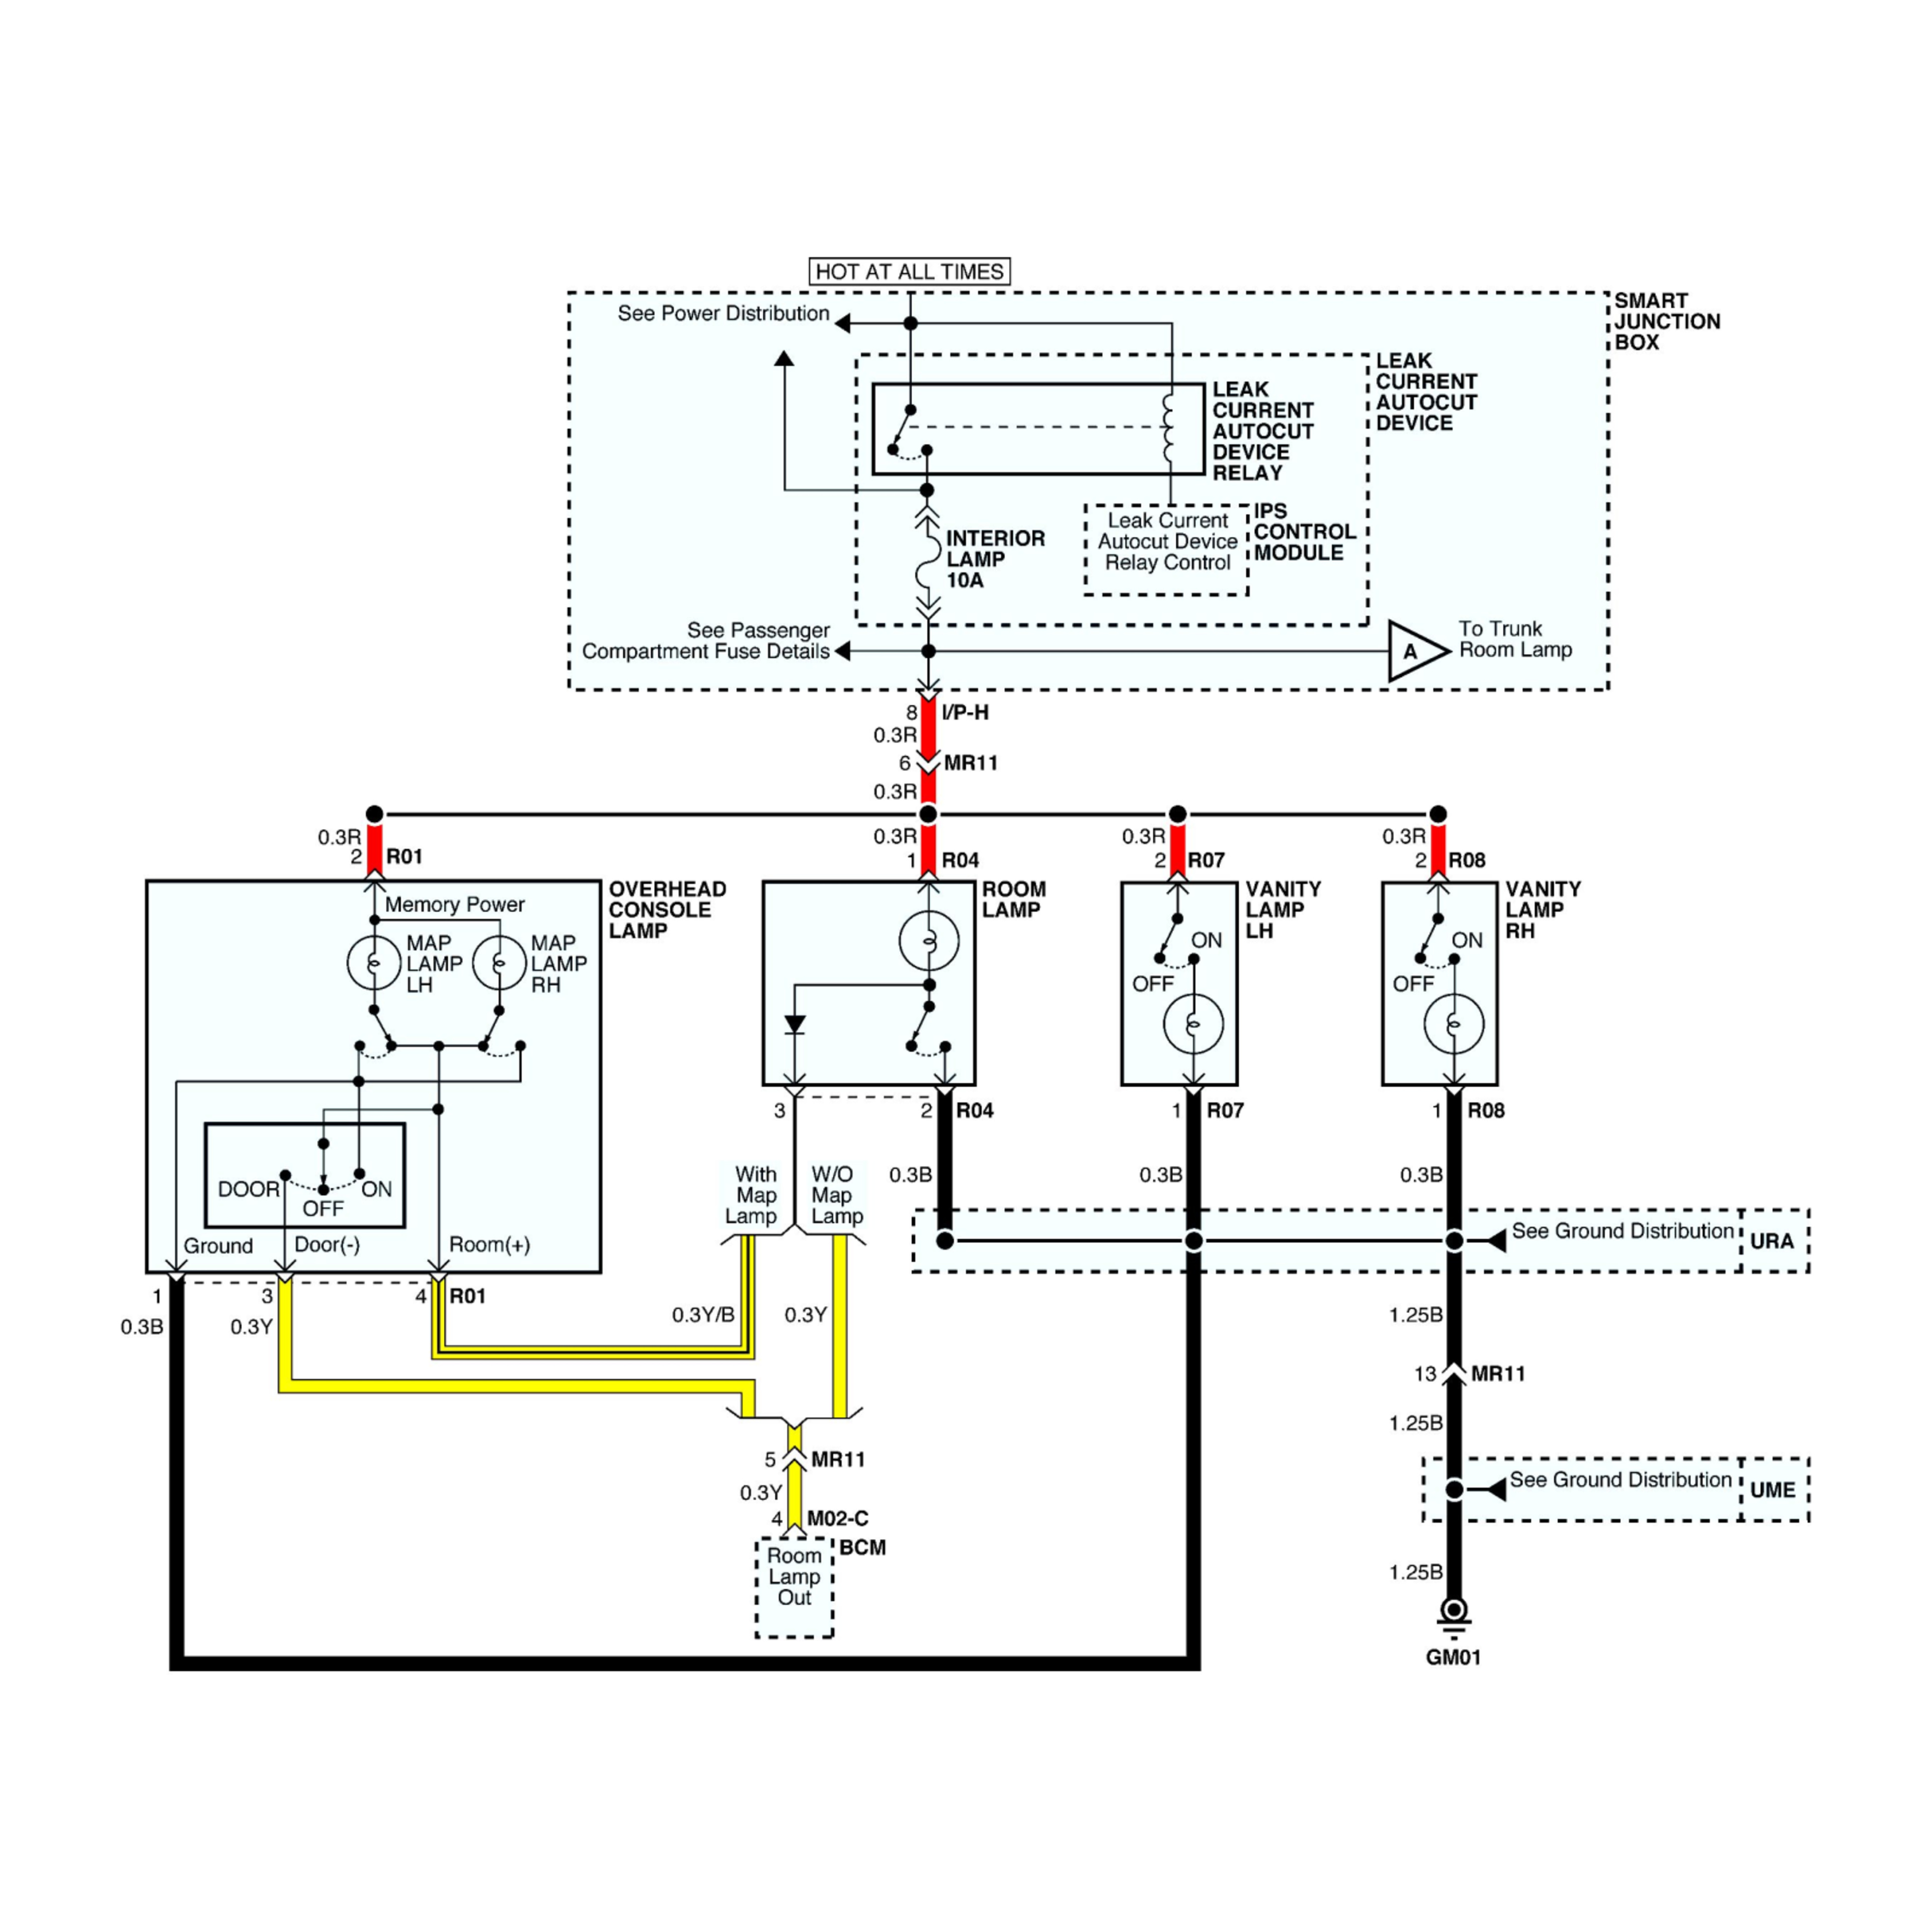 2003 Chevrolet SSR wiring diagrams example